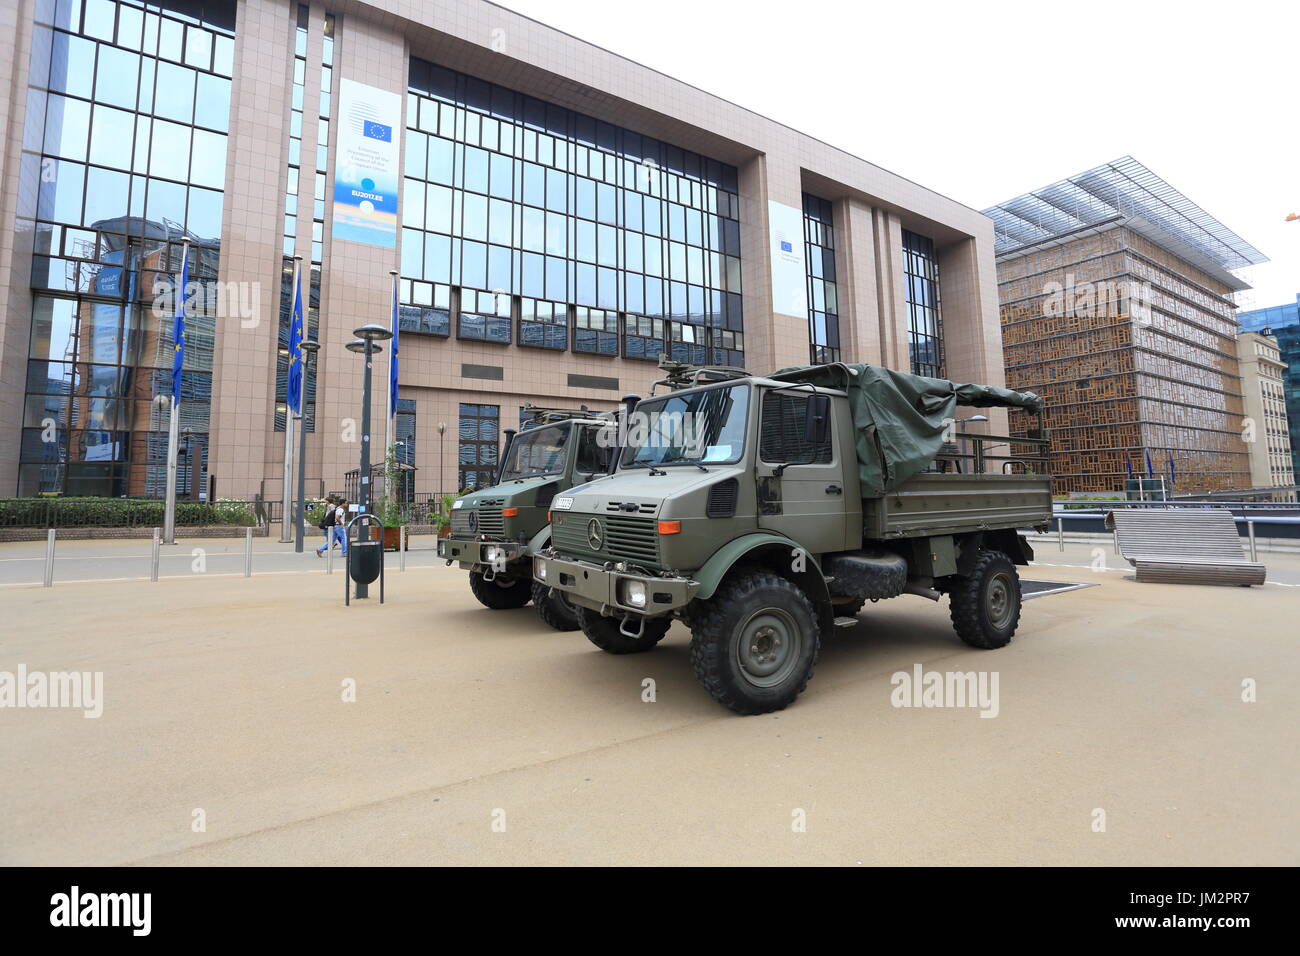 Brussels, Belgium - July 17, 2017: Military trucks opposite European Council building. Army on the streets of Brussels after the terrorist acts. Stock Photo